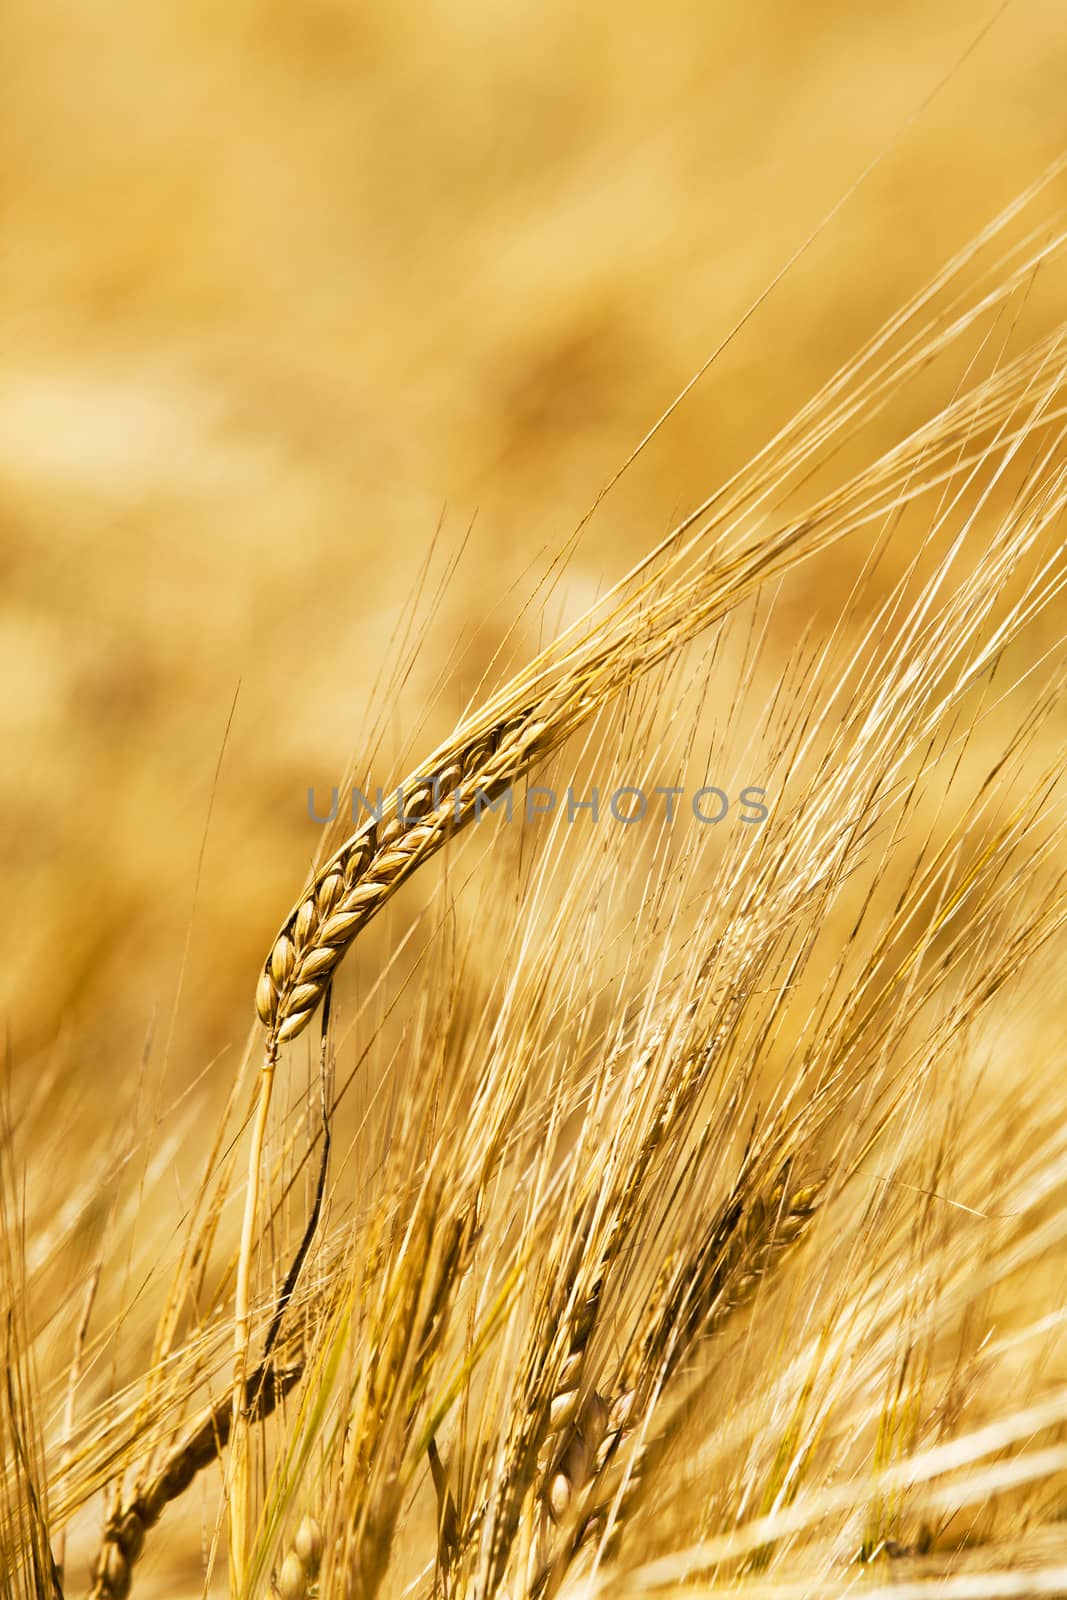  the photo a close up of ears of a rye. small depth of sharpness